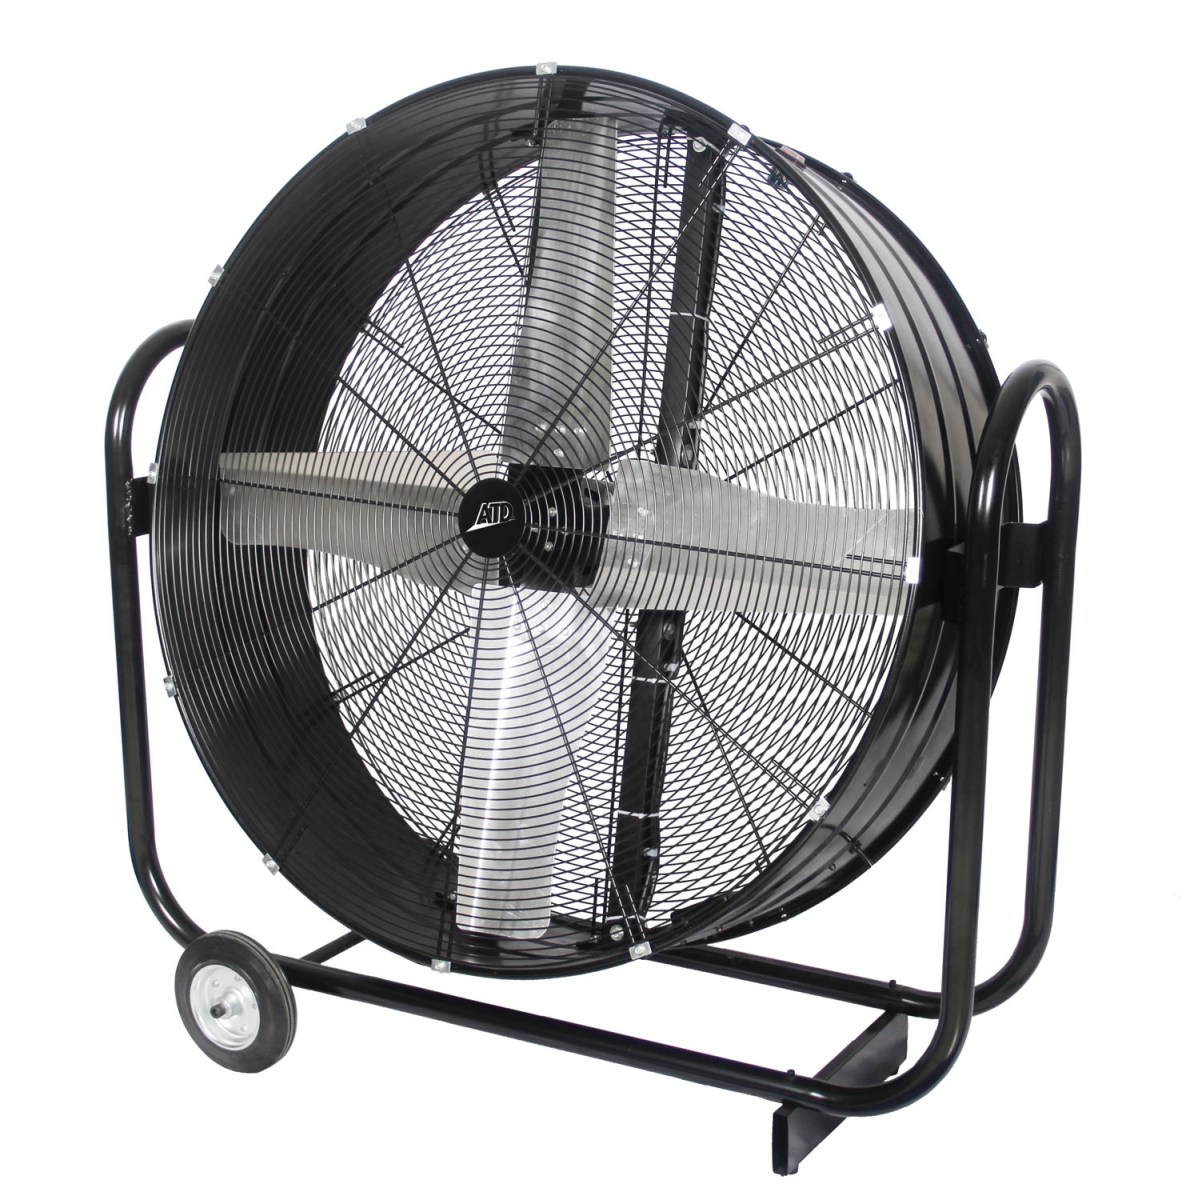 ATD TOOLS ATD-30344 42 in. Tilting Direct Drive Drum Fan